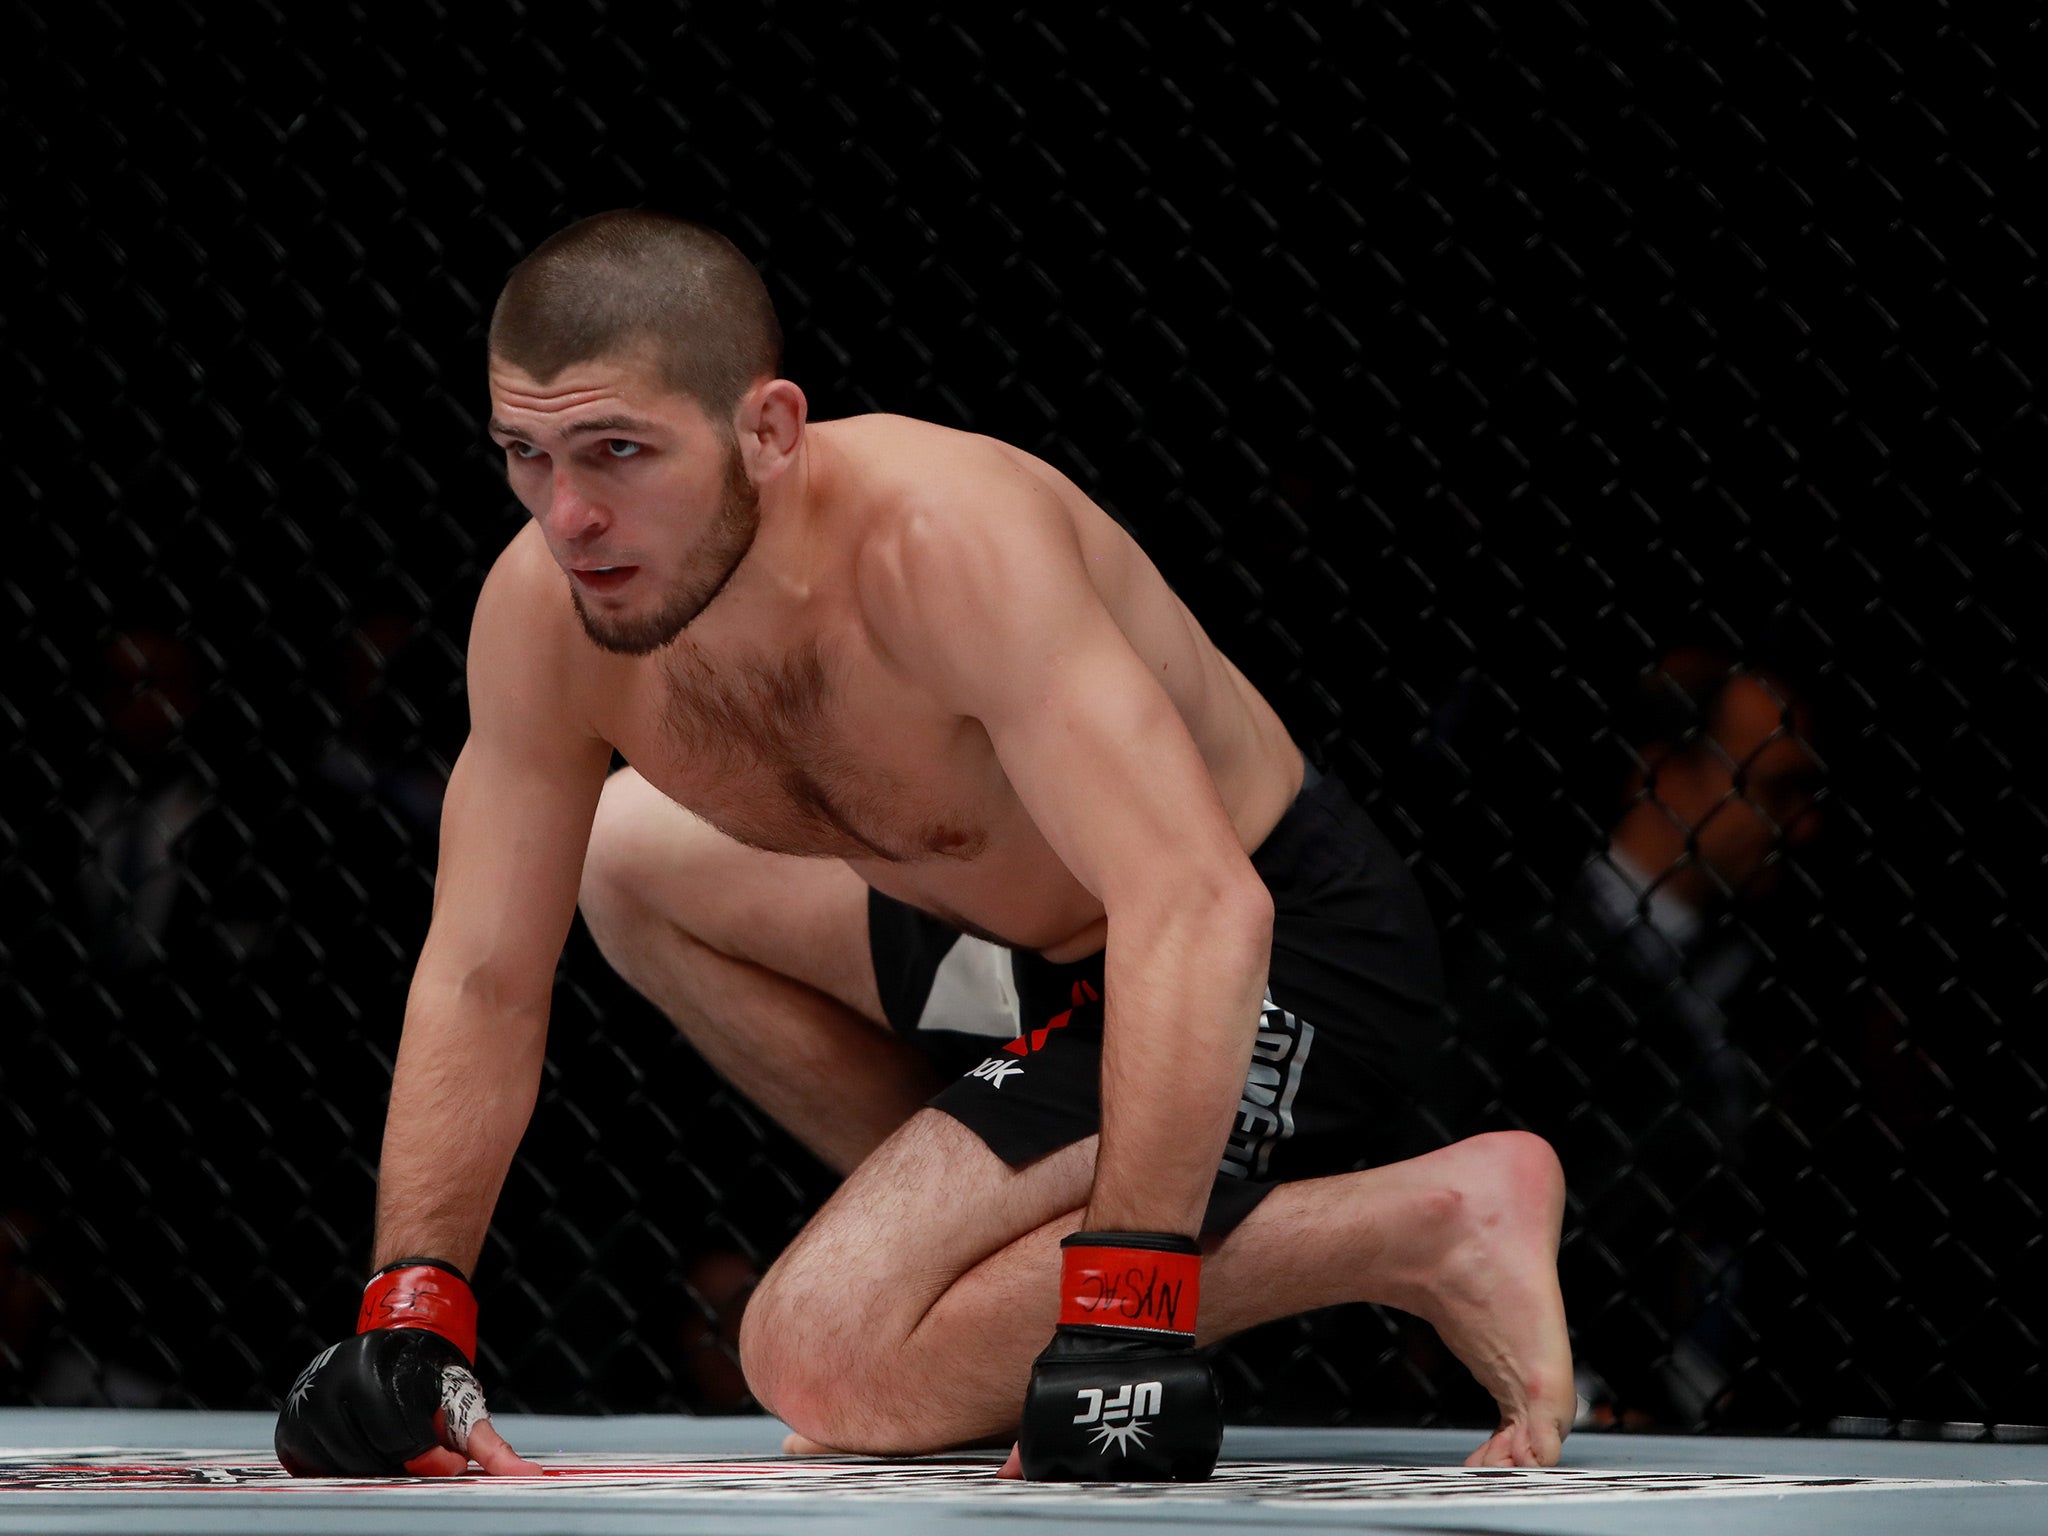 UFC star Nurmagomedov is expected to be McGregor's next opponent